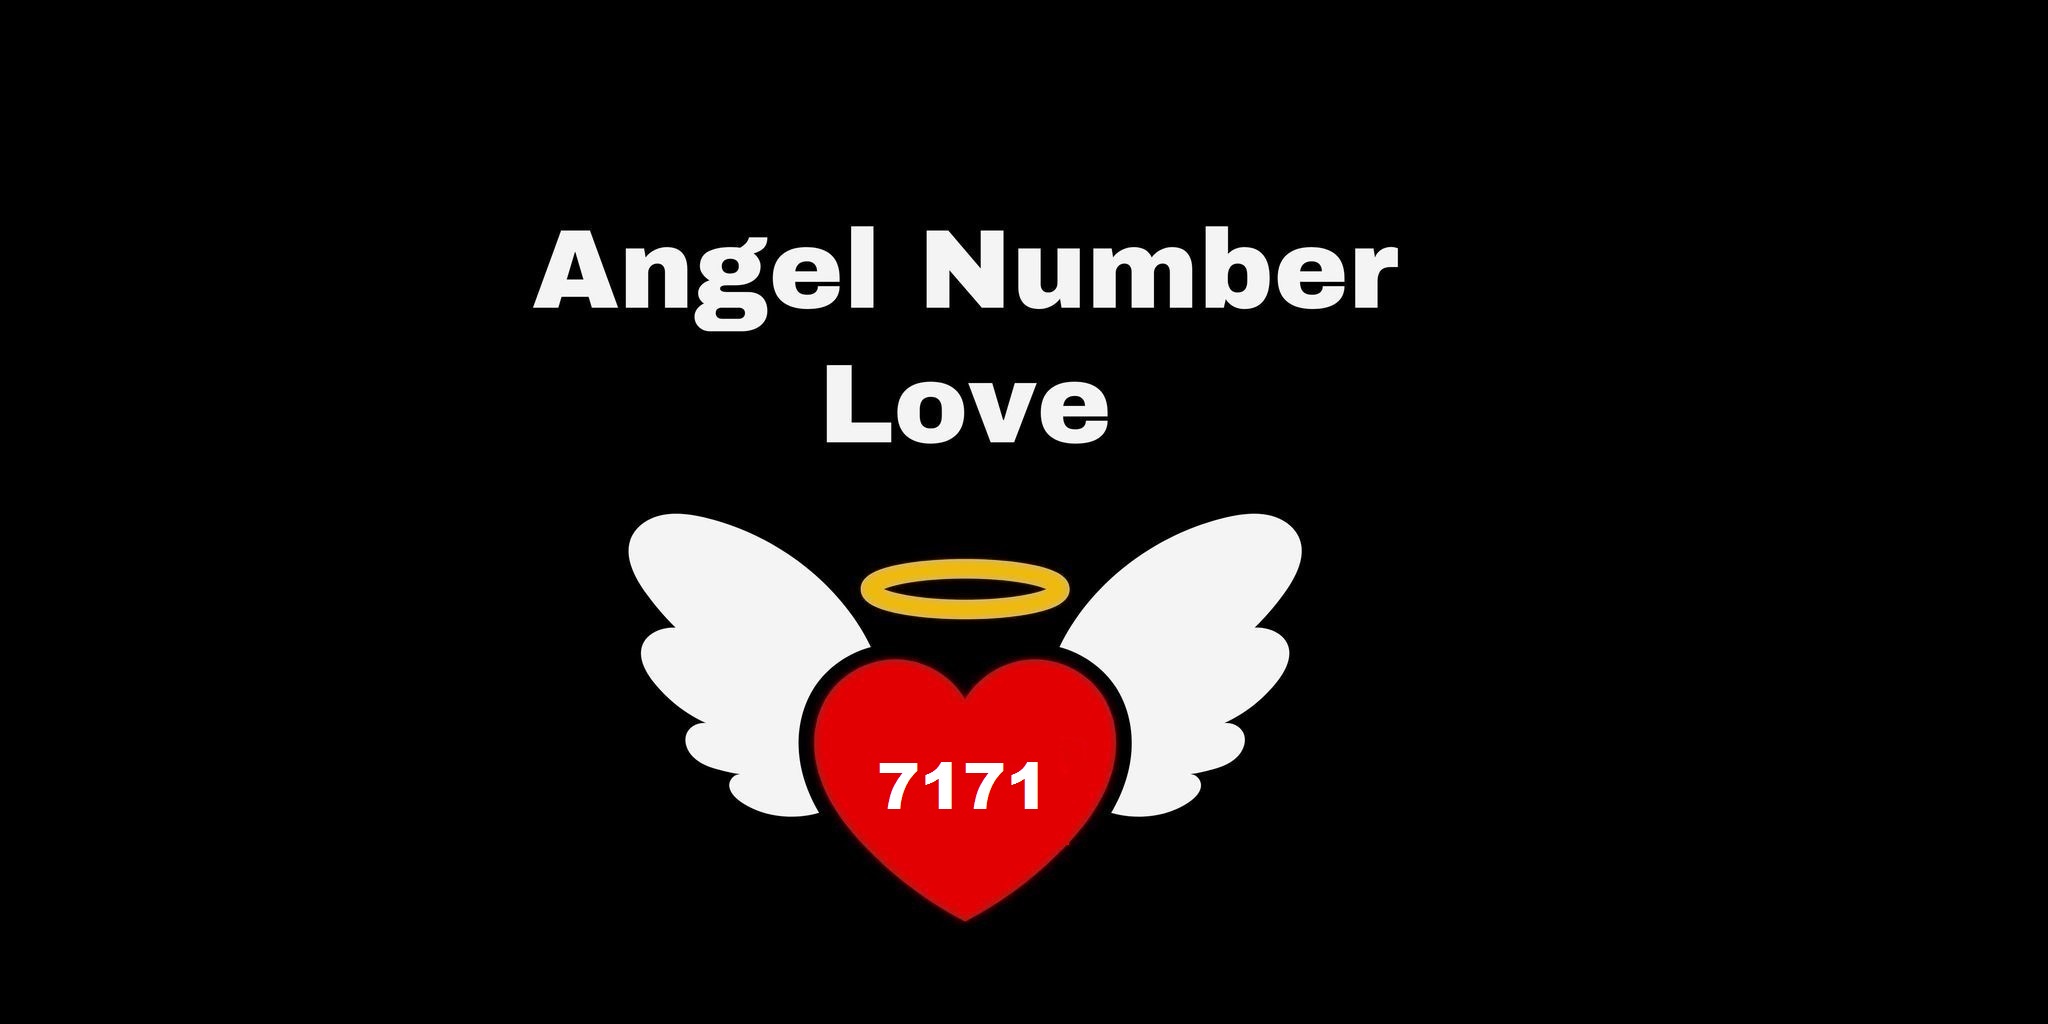 7171 Angel Number Meaning In Love